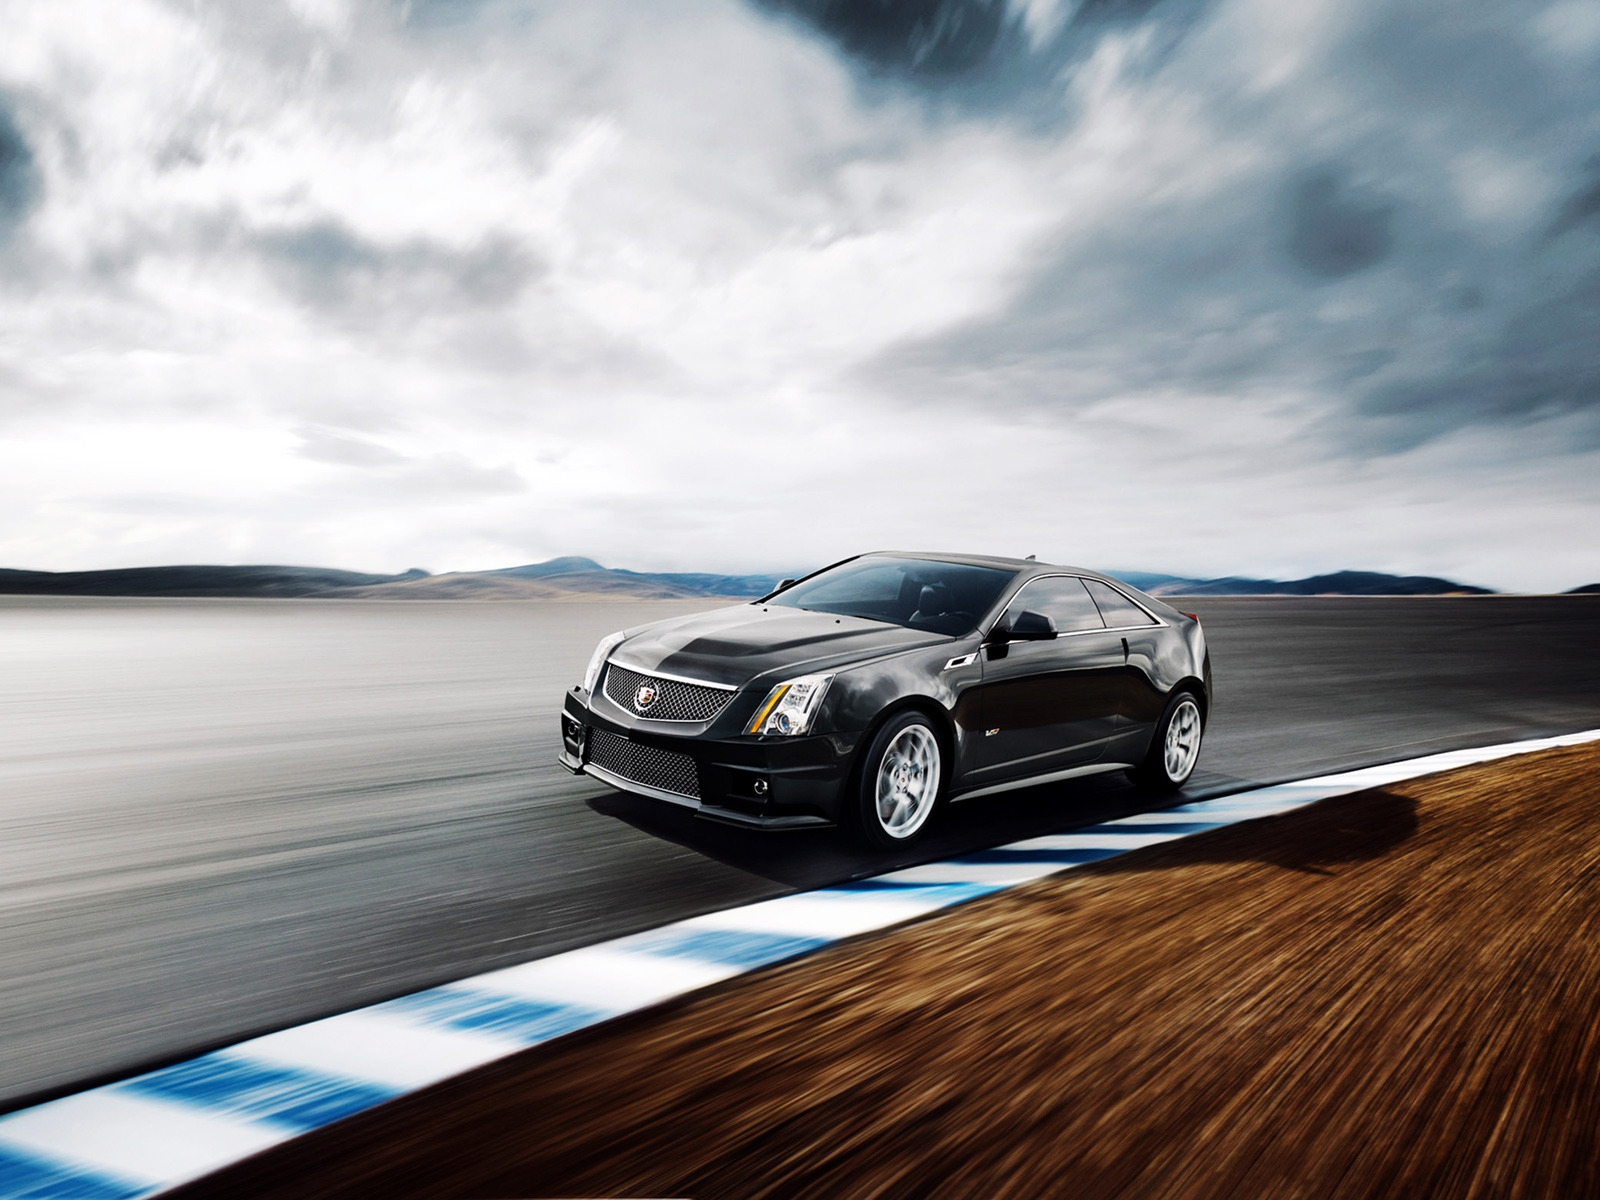 2011 Cadillac CTS V Coupe for 1600 x 1200 resolution